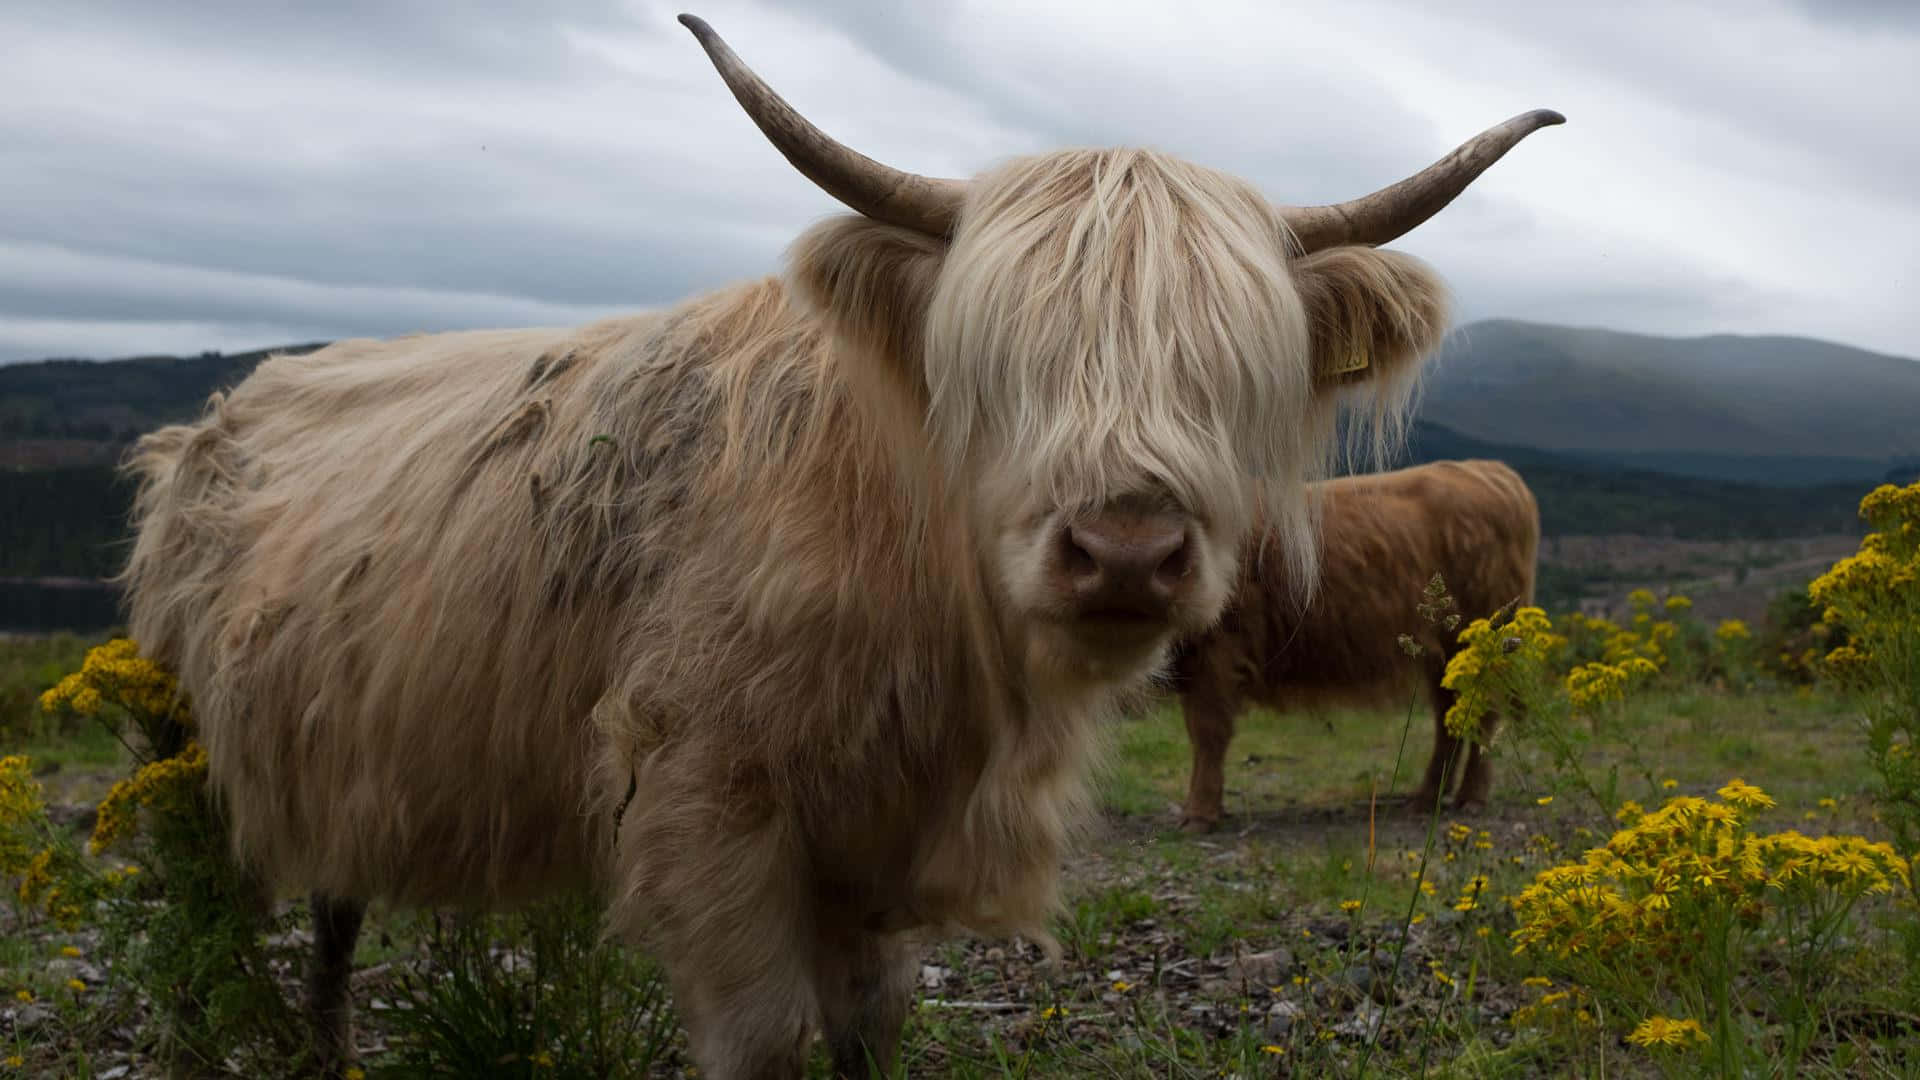 Majestic Highland Cow in its Natural Habitat